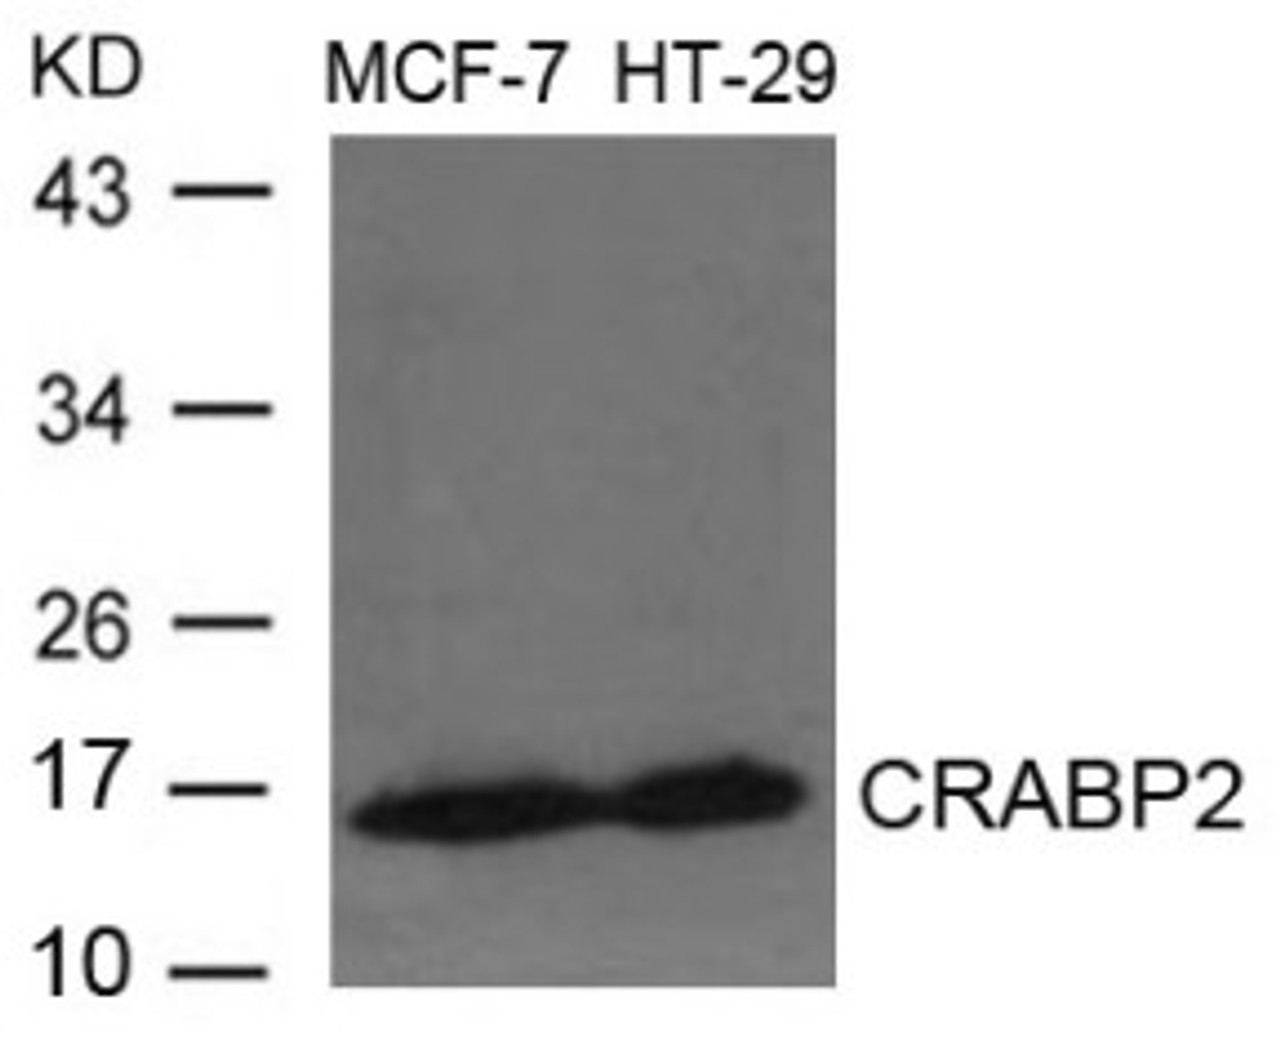 Western blot analysis of lysed extracts from MCF-7 and HT-29 cells using CRABP2 Antibody.